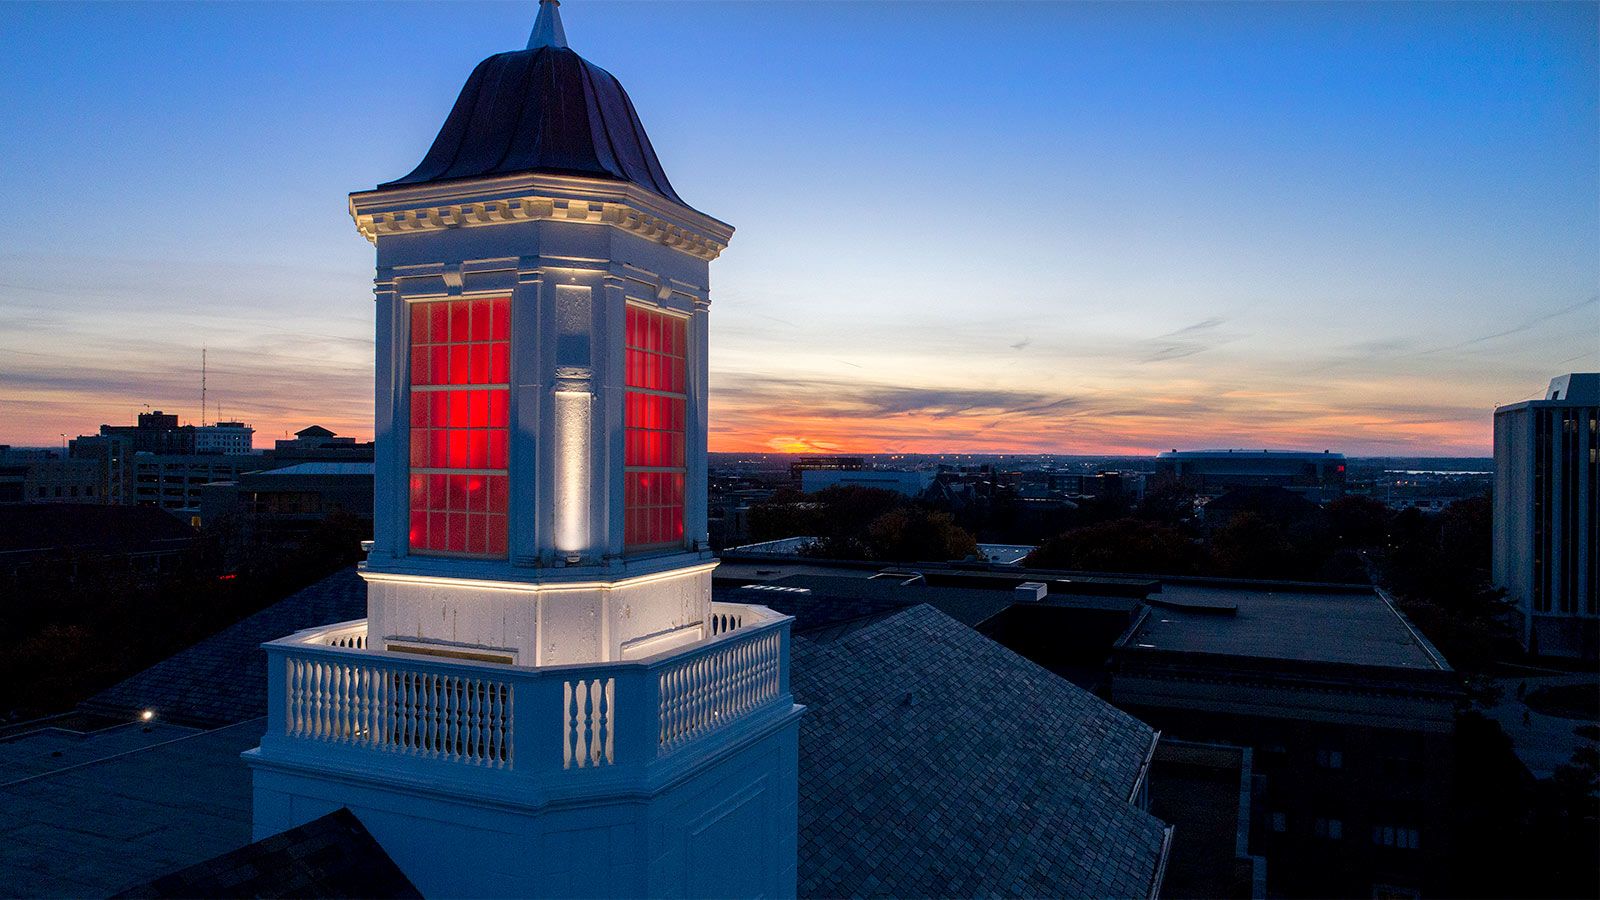 The cupola on top of Love Library lit up red